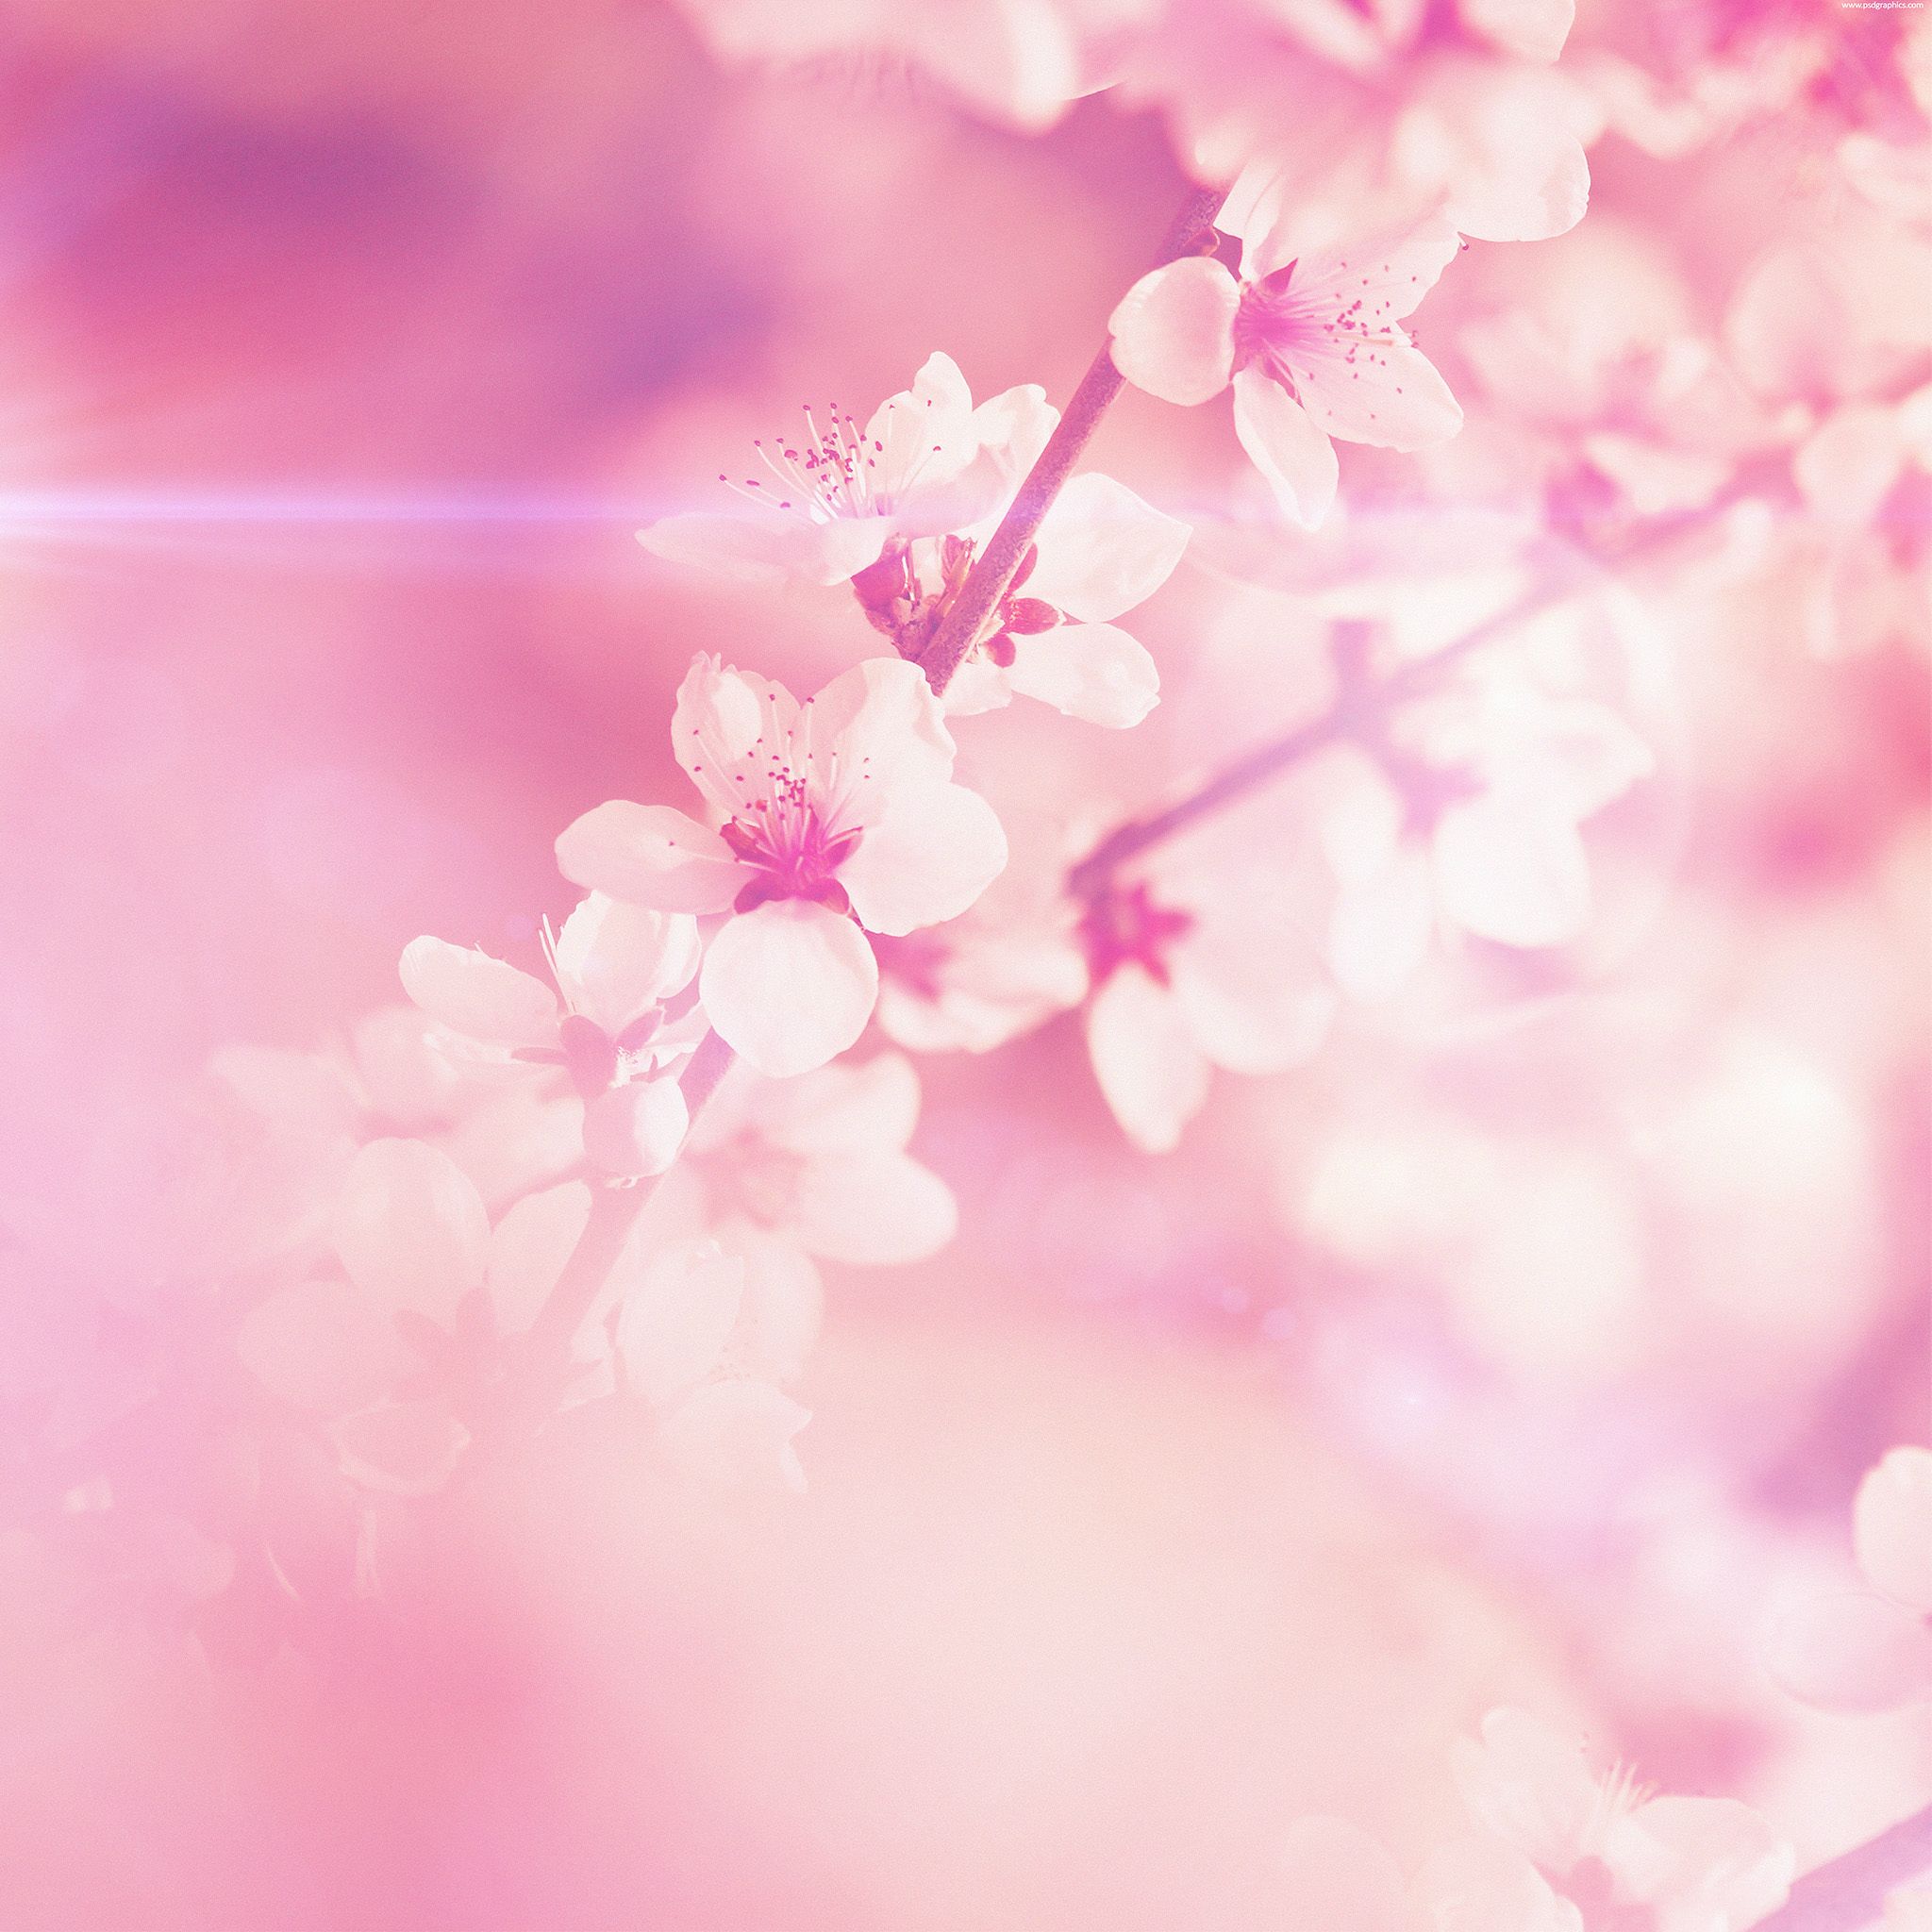 Spring Pink Cherry Blossom Flare Nature iPad Air Wallpaper Free Download